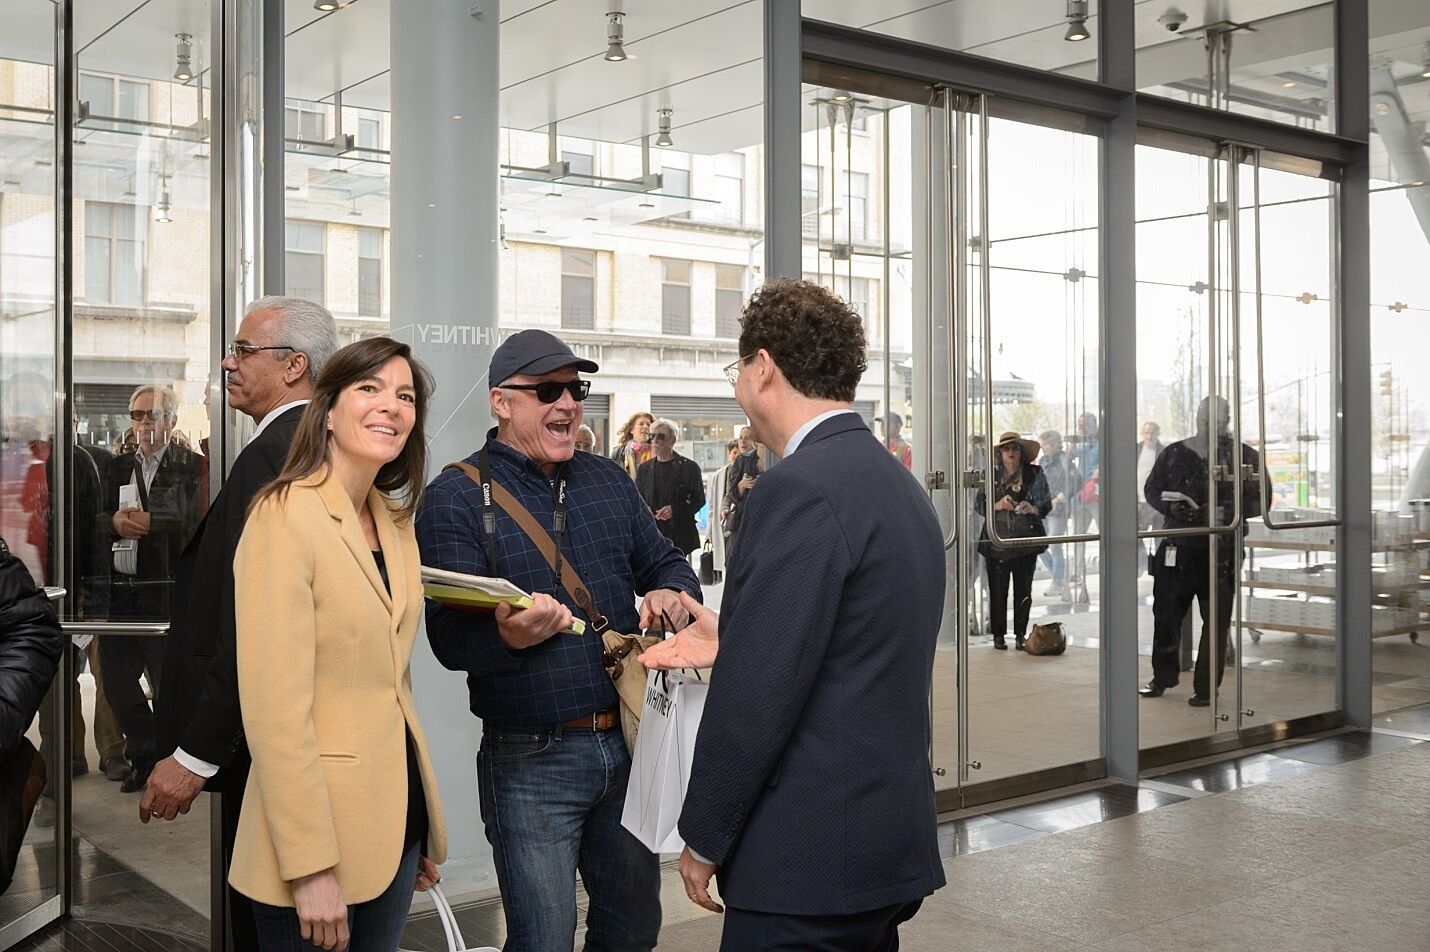 Opening day at the new Whitney Museum